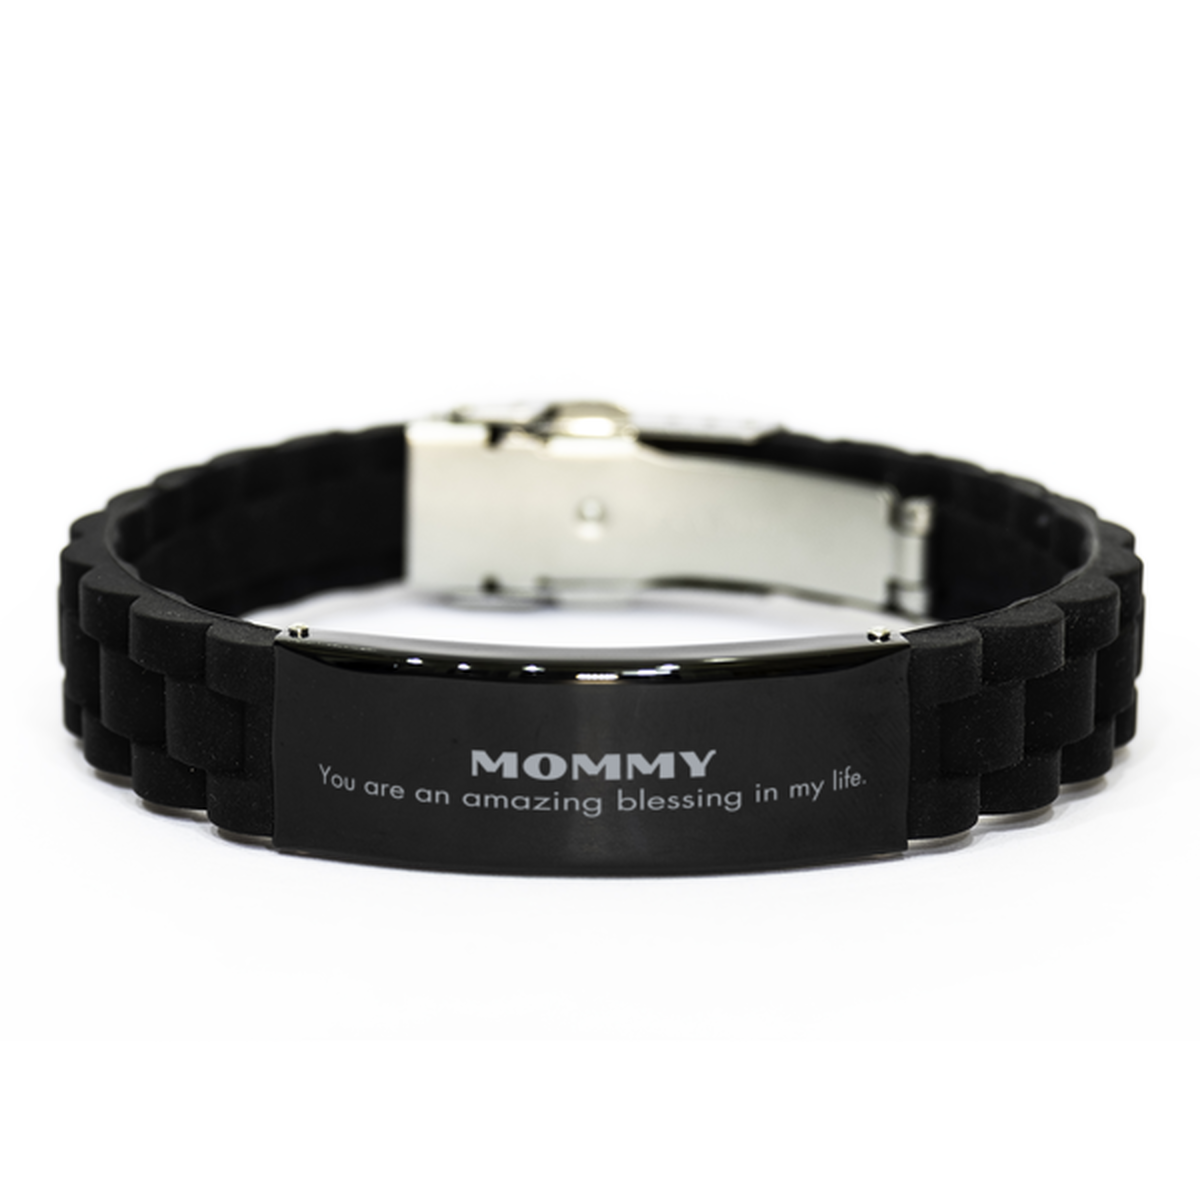 Mommy Black Glidelock Clasp Bracelet, You are an amazing blessing in my life, Thank You Gifts For Mommy, Inspirational Birthday Christmas Unique Gifts For Mommy